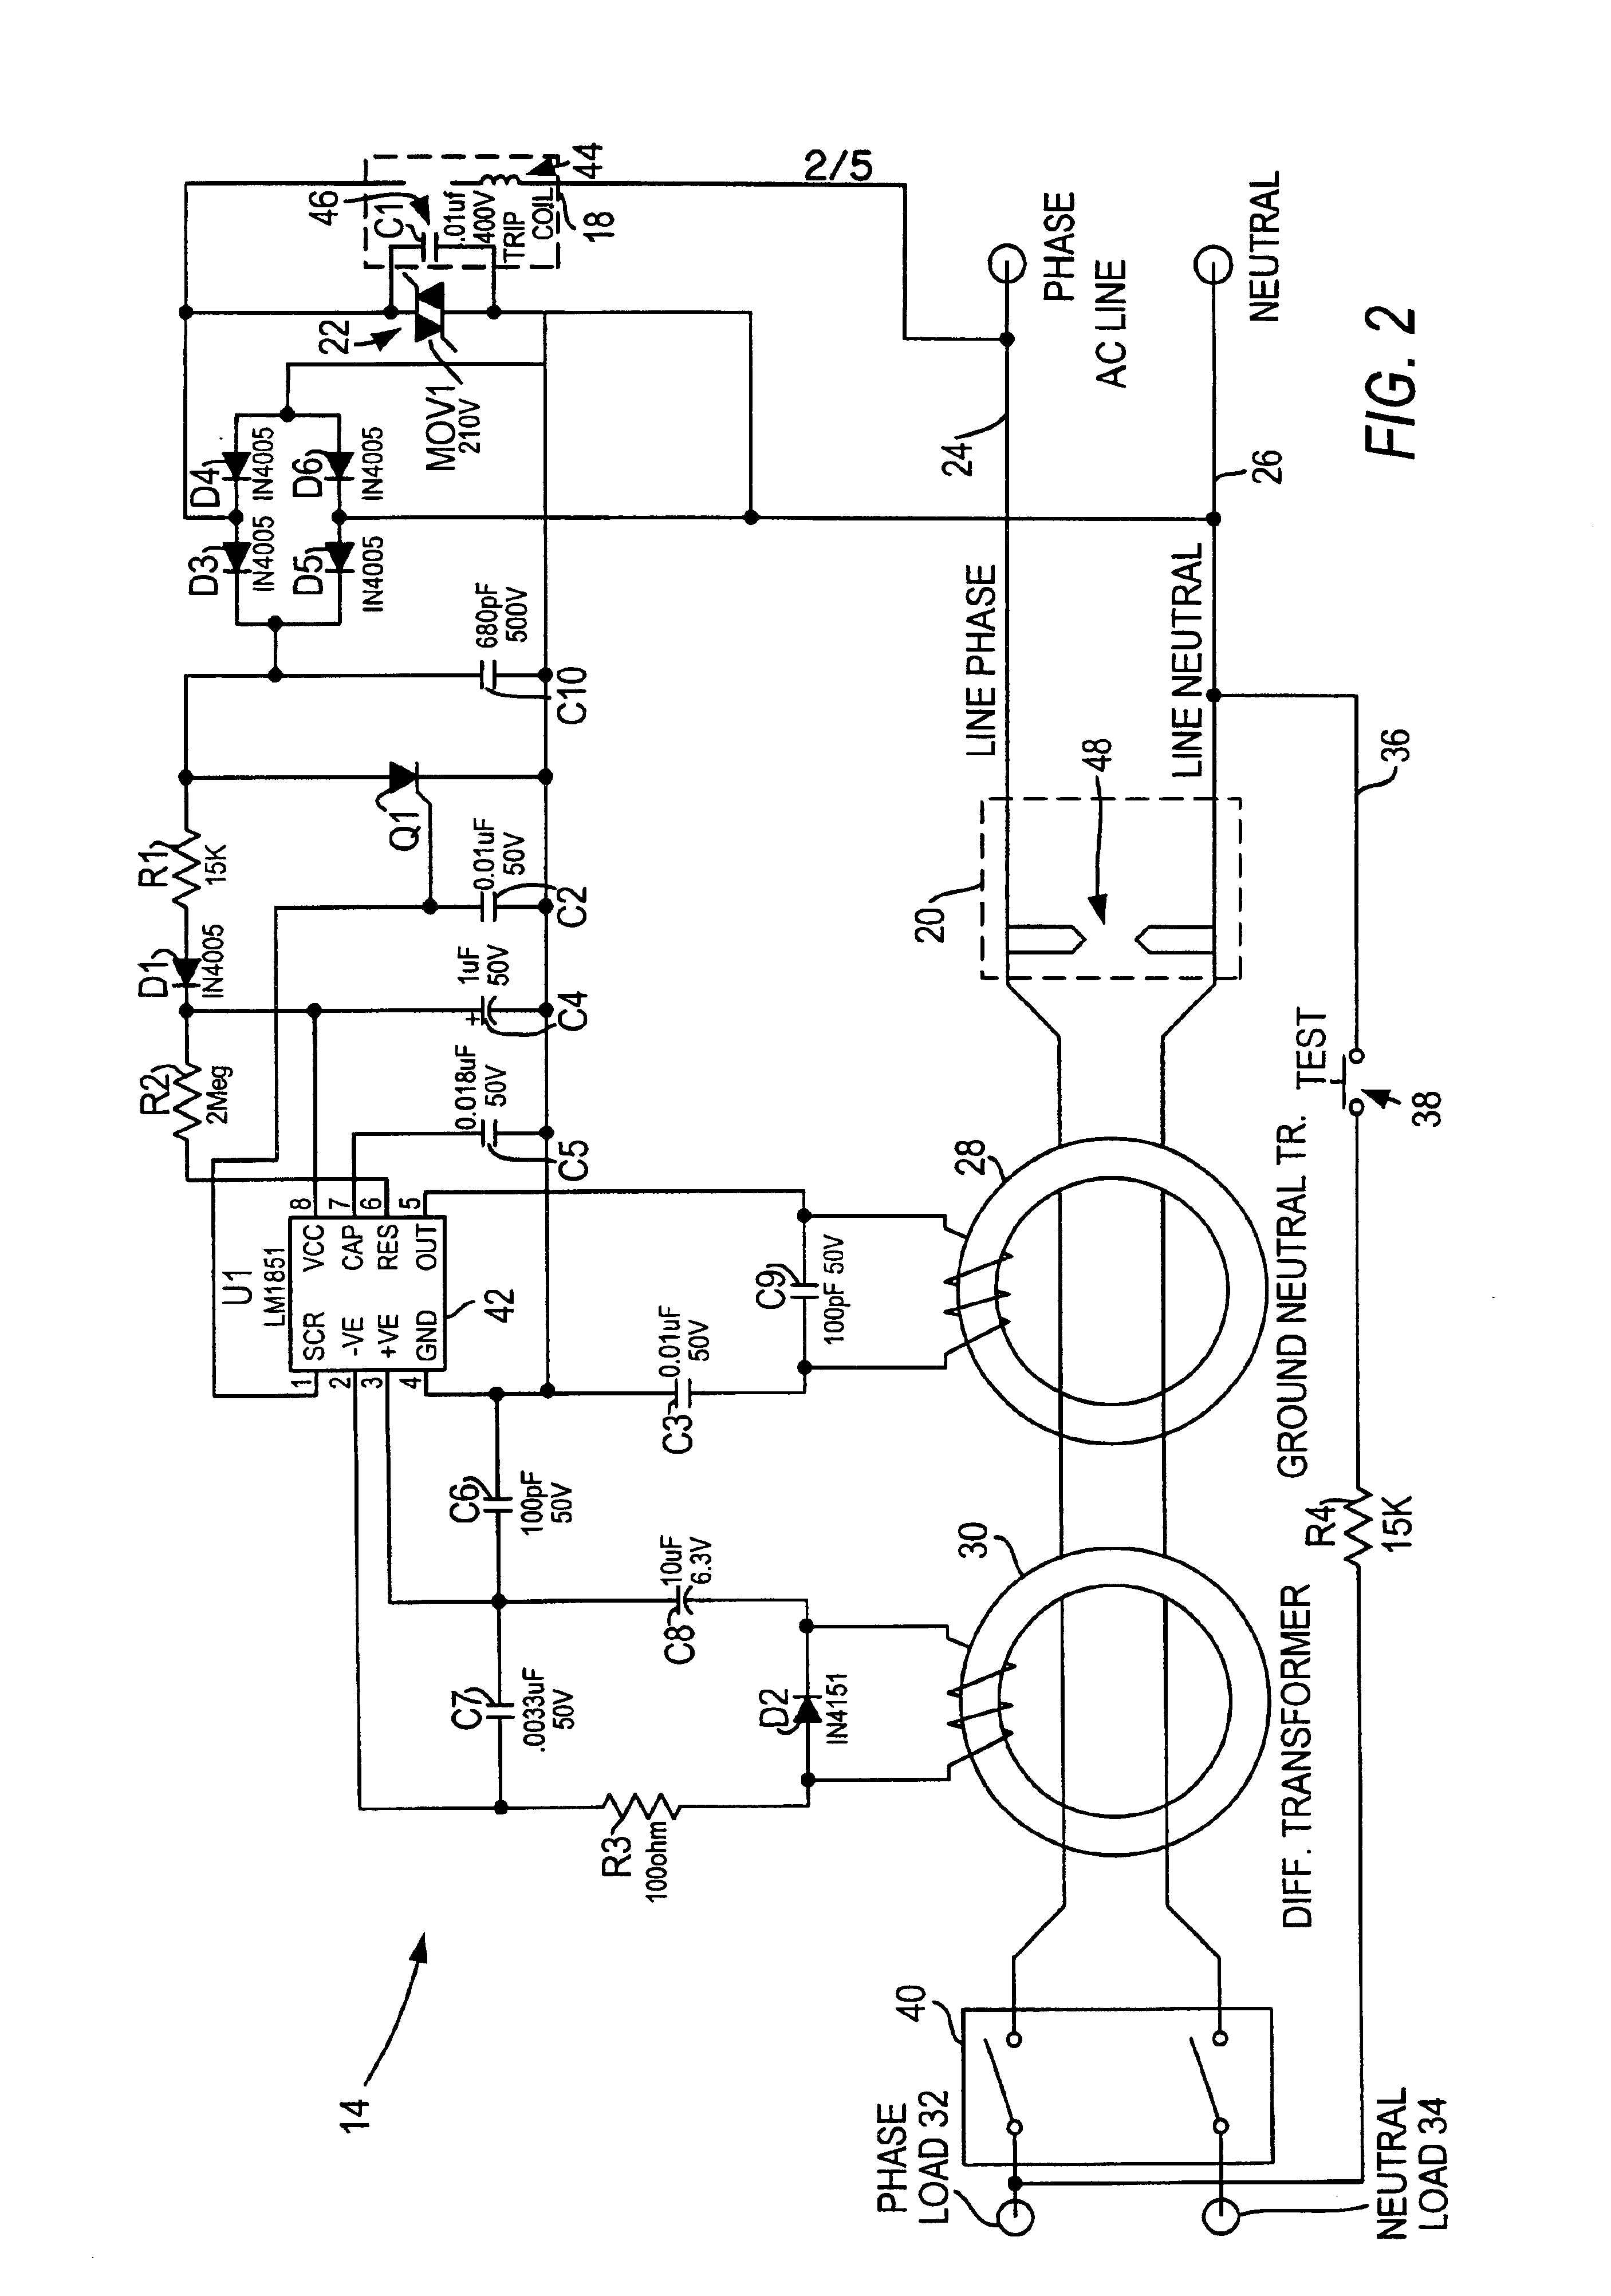 Circuit interrupter with improved surge suppression